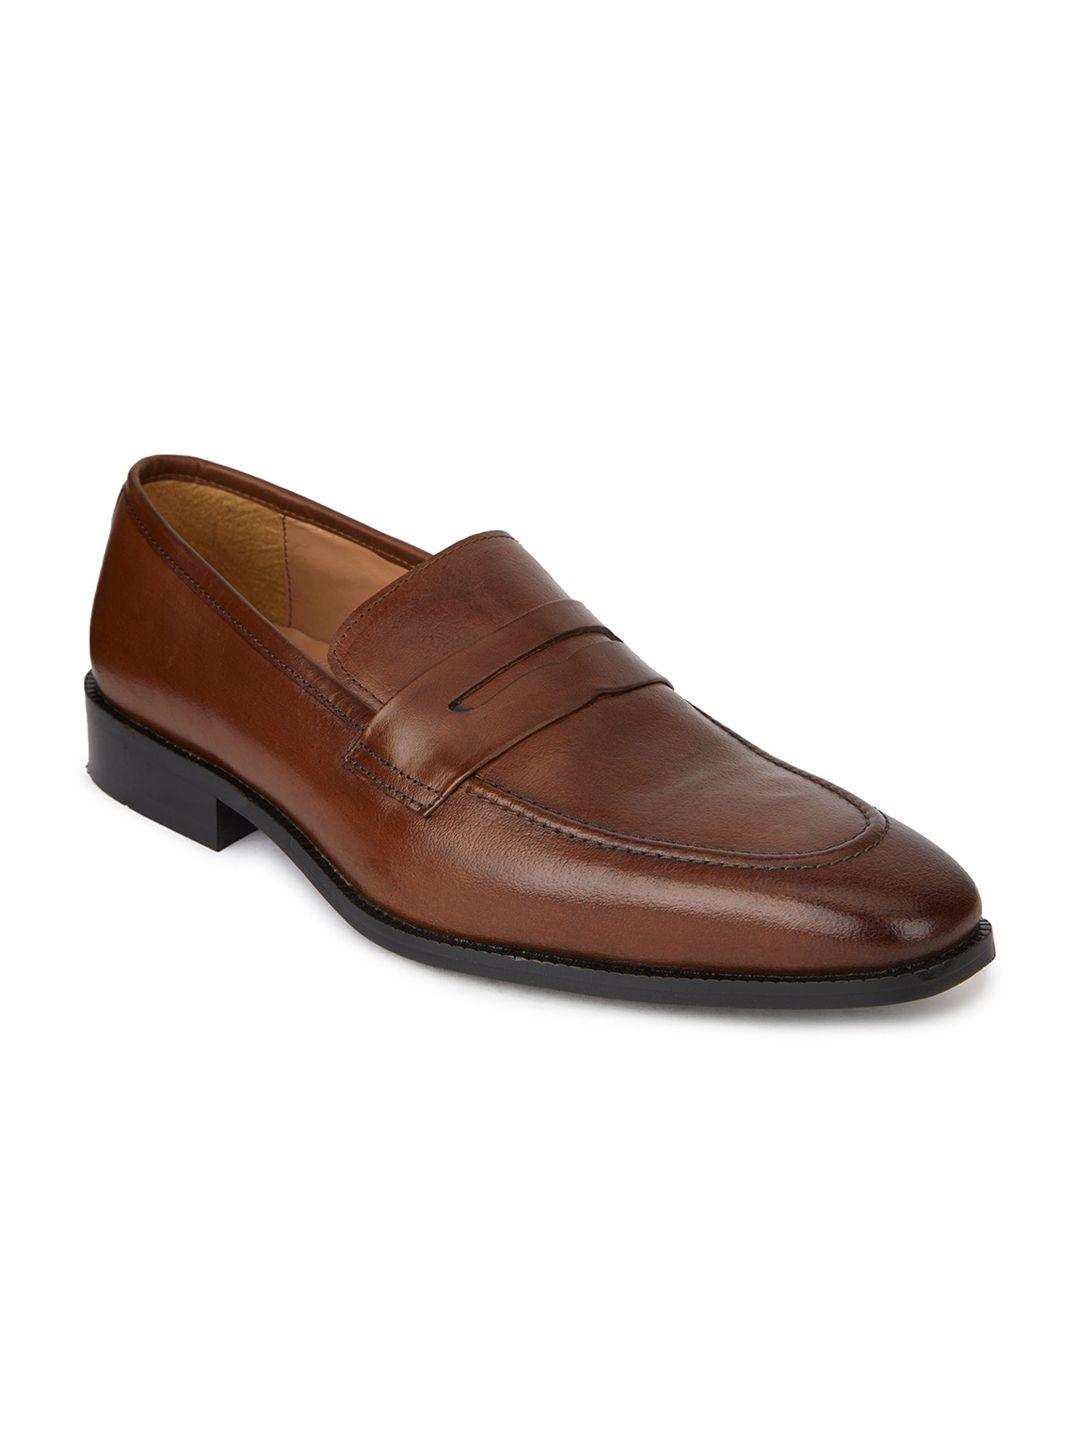 hats off accessories men genuine leather formal loafers